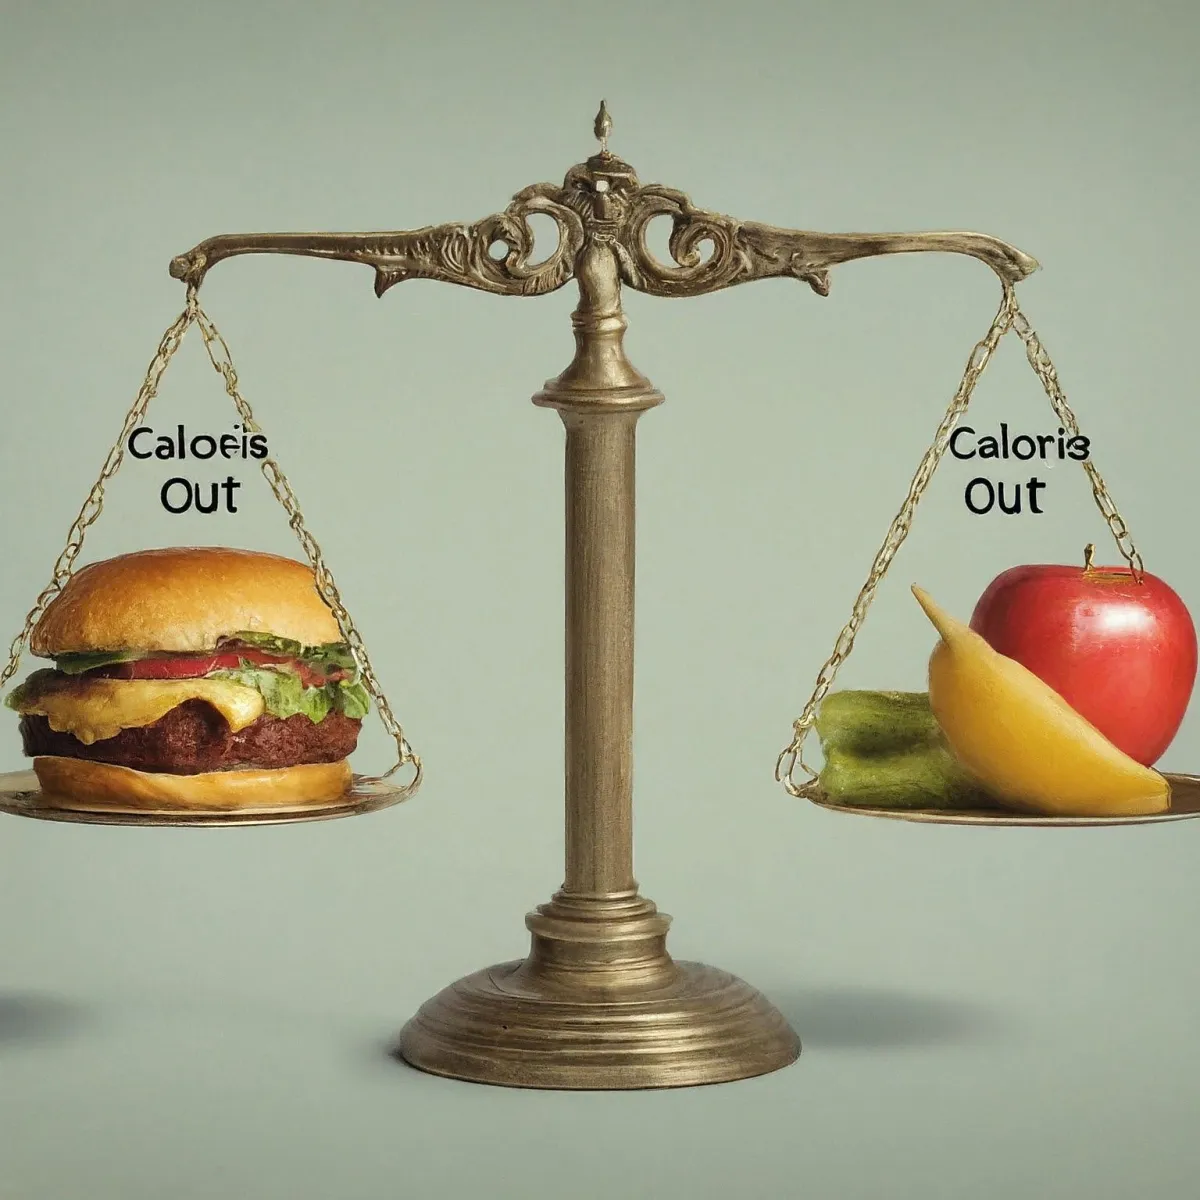 A vibrant infographic illustrating the concept of calorie deficit, showing a balance scale with calories in versus calories out